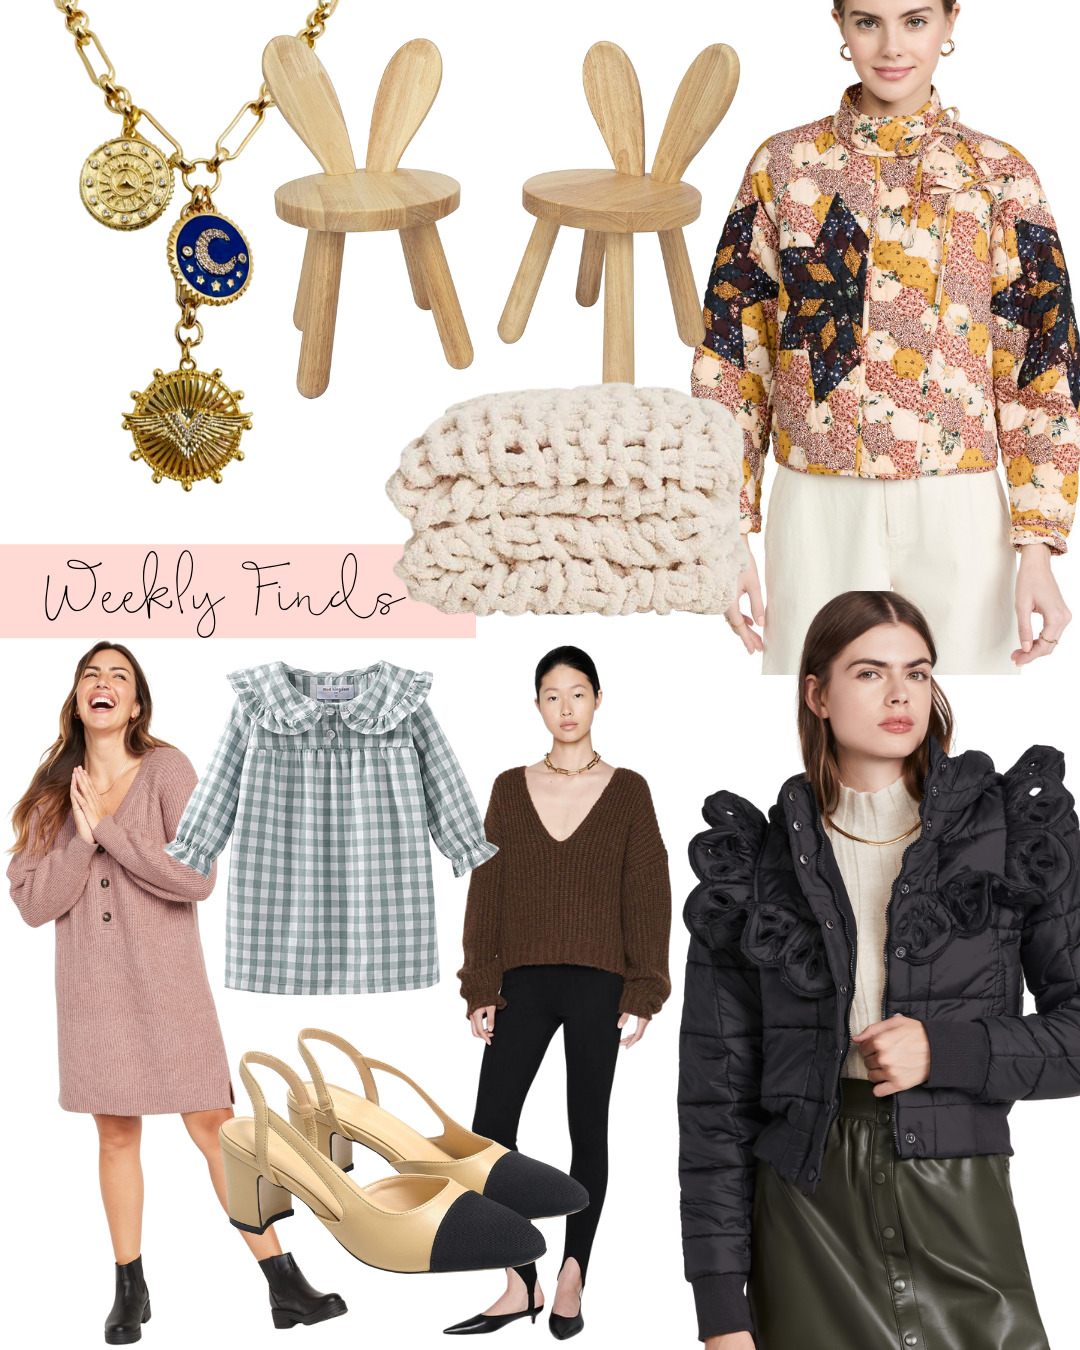 Weekly Finds + A Few Chic Gift Ideas